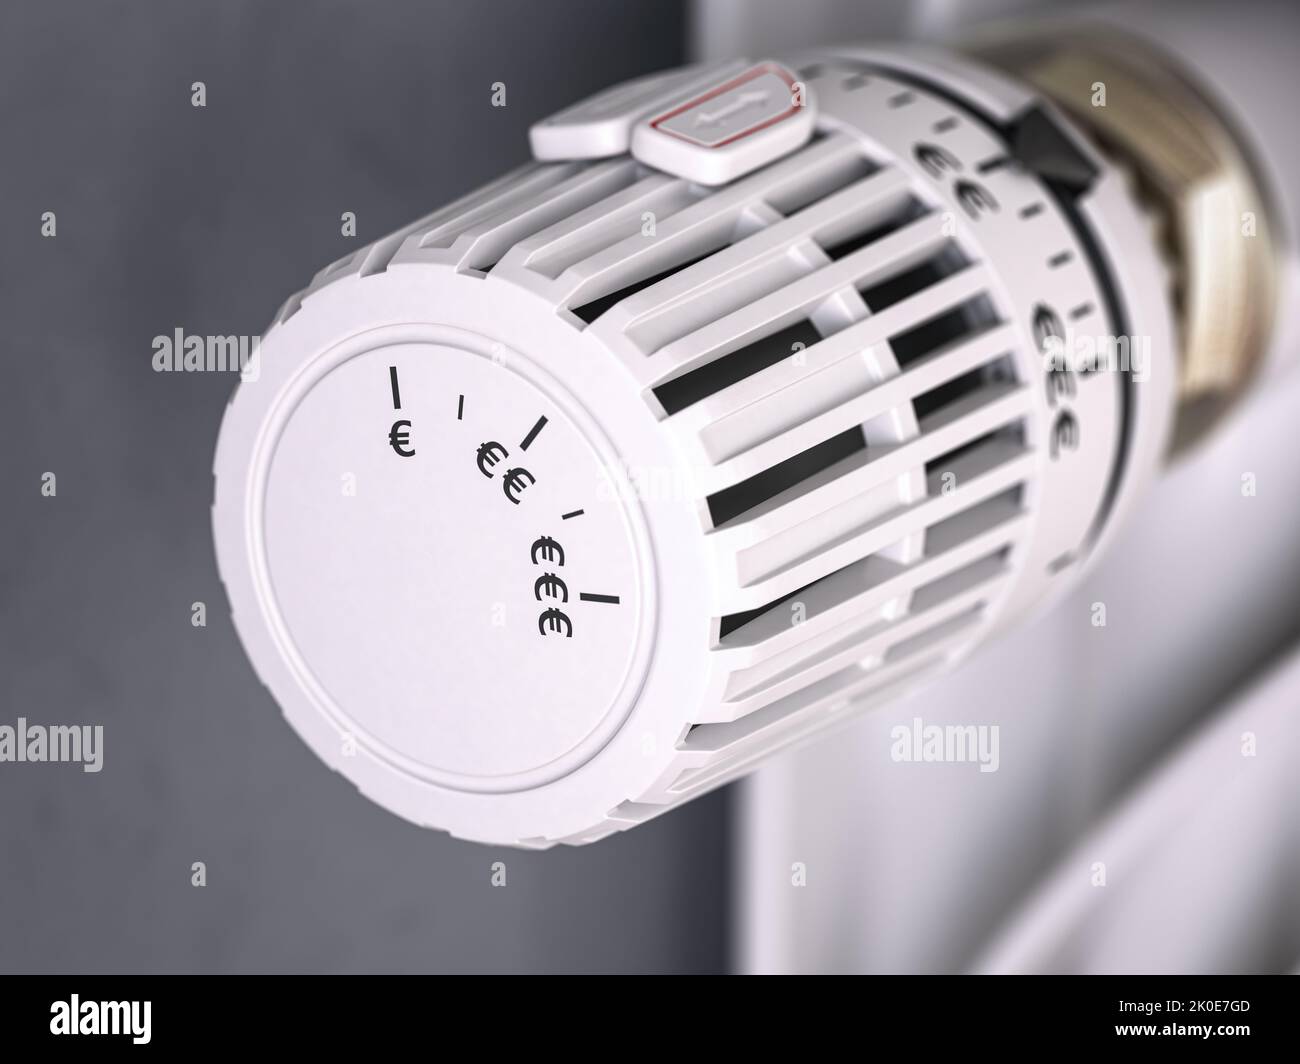 Heating radiator thermostat with euro sign. Energy crisis, energy efficiency and rising heating costs in Europe concept. 3d illustration Stock Photo